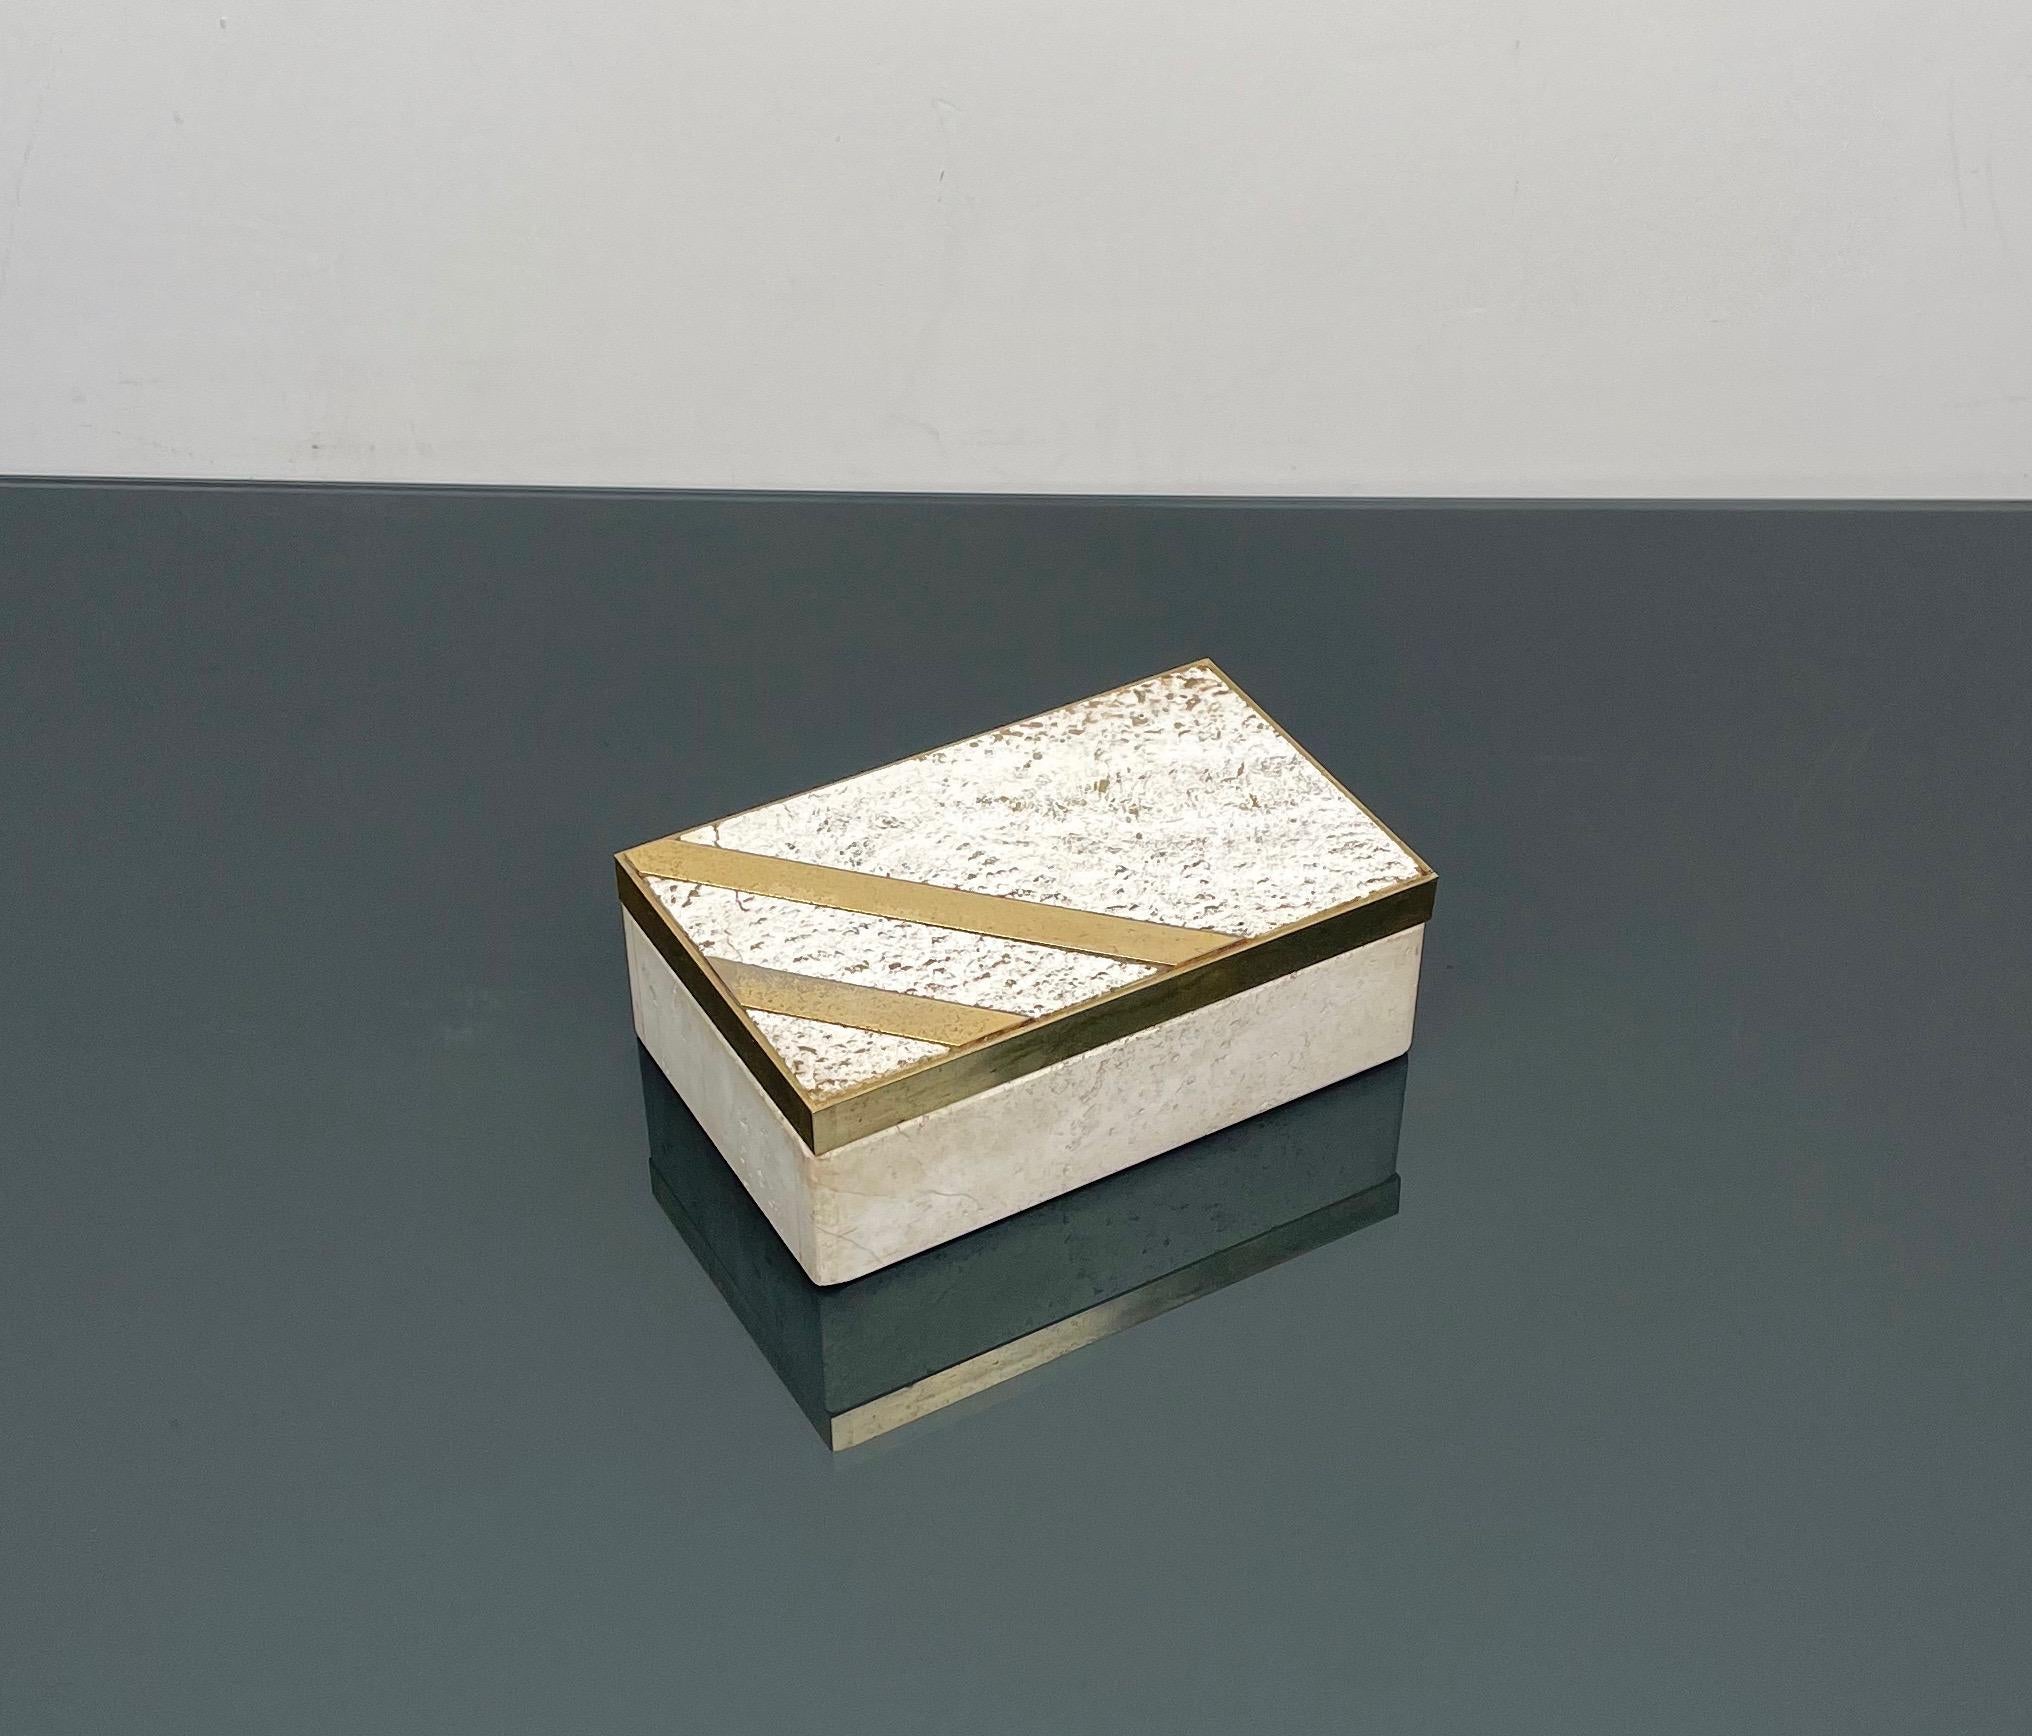 Amazing rectangular box in travertine and brass.

Made in Italy in the 1970s.